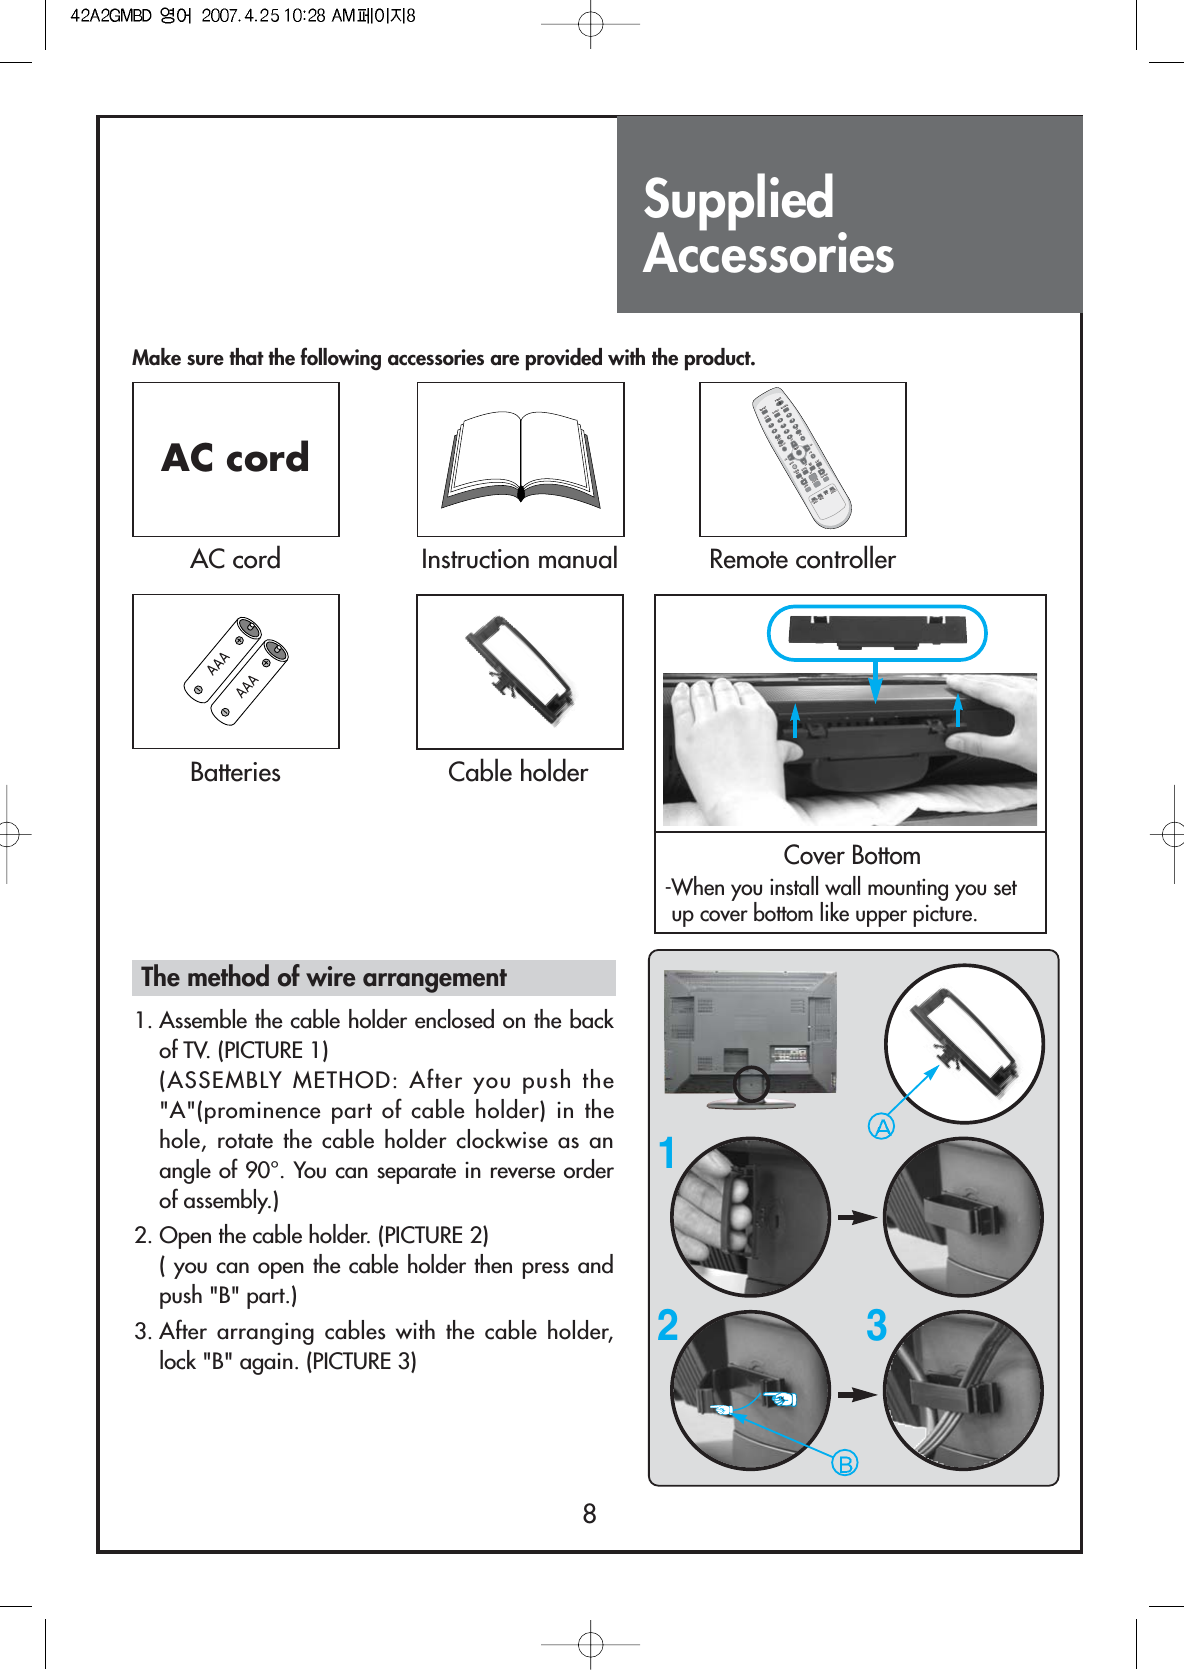 SuppliedAccessories8Make sure that the following accessories are provided with the product.AC cordAC cord Instruction manualDISPLAYMENUGUIDETV/VIDEOFAVPREV.CHMUTESCREENSIZECAPTIONCHPIPCHSWAPPICTUREMODESOUNDMODEMTSSOUNDEFFECTSOURCEPOSITIONSLEEPVOLVOLCHCHMULTIMEDIASTILL100POWER1234567809FAVADD/DELRemote controllerBatteriesCover Bottom-When you install wall mounting you setup cover bottom like upper picture.Cable holder123The method of wire arrangement1. Assemble the cable holder enclosed on the backof TV. (PICTURE 1) (ASSEMBLY METHOD: After you push the&quot;A&quot;(prominence part of cable holder) in thehole, rotate the cable holder clockwise as anangle of 90°. You can separate in reverse orderof assembly.)2. Open the cable holder. (PICTURE 2)( you can open the cable holder then press andpush &quot;B&quot; part.)3. After arranging cables with the cable holder,lock &quot;B&quot; again. (PICTURE 3)